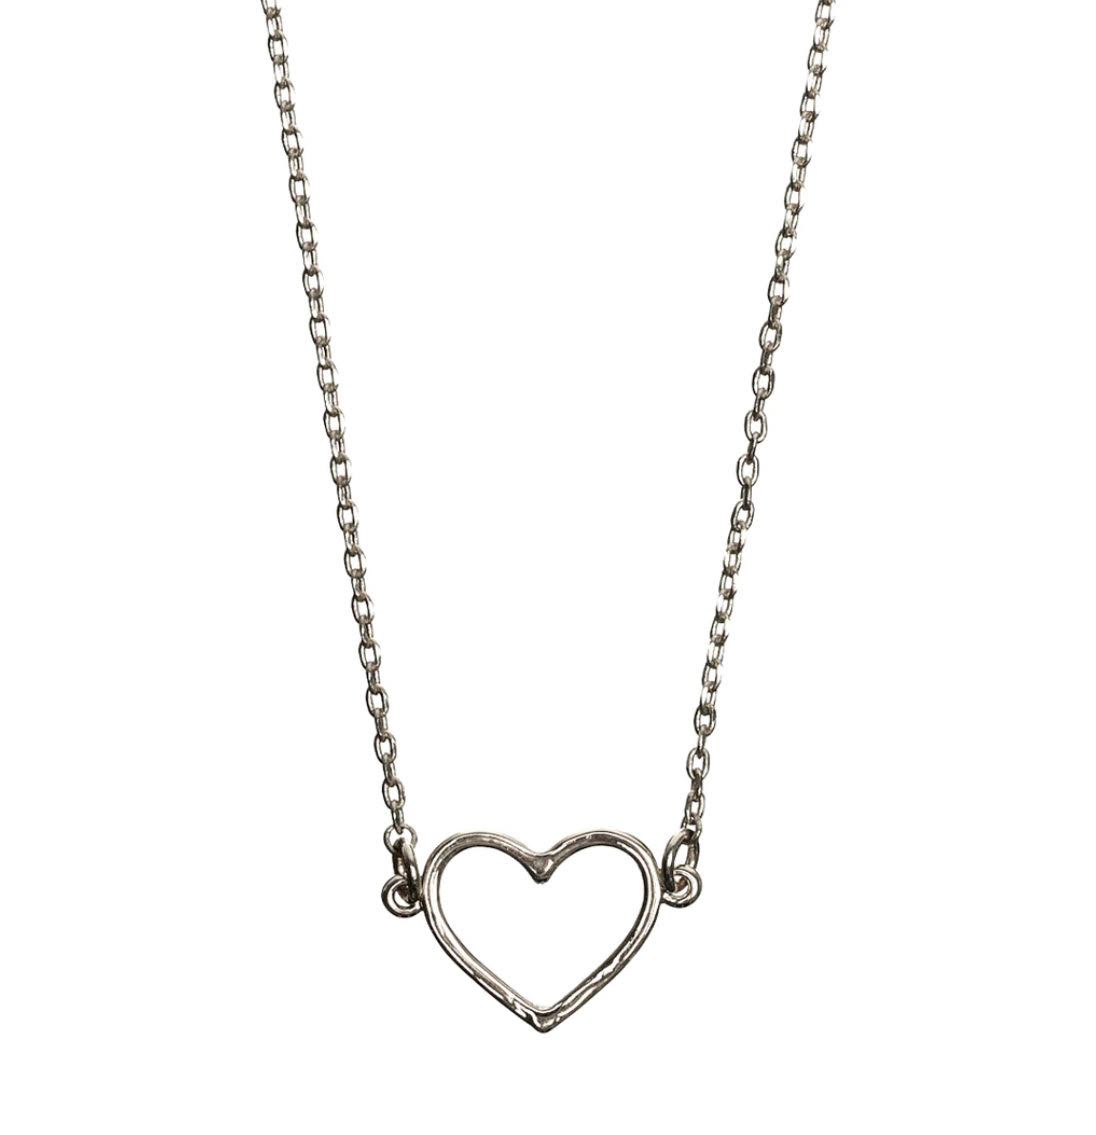 Heart Outlined neclace silver